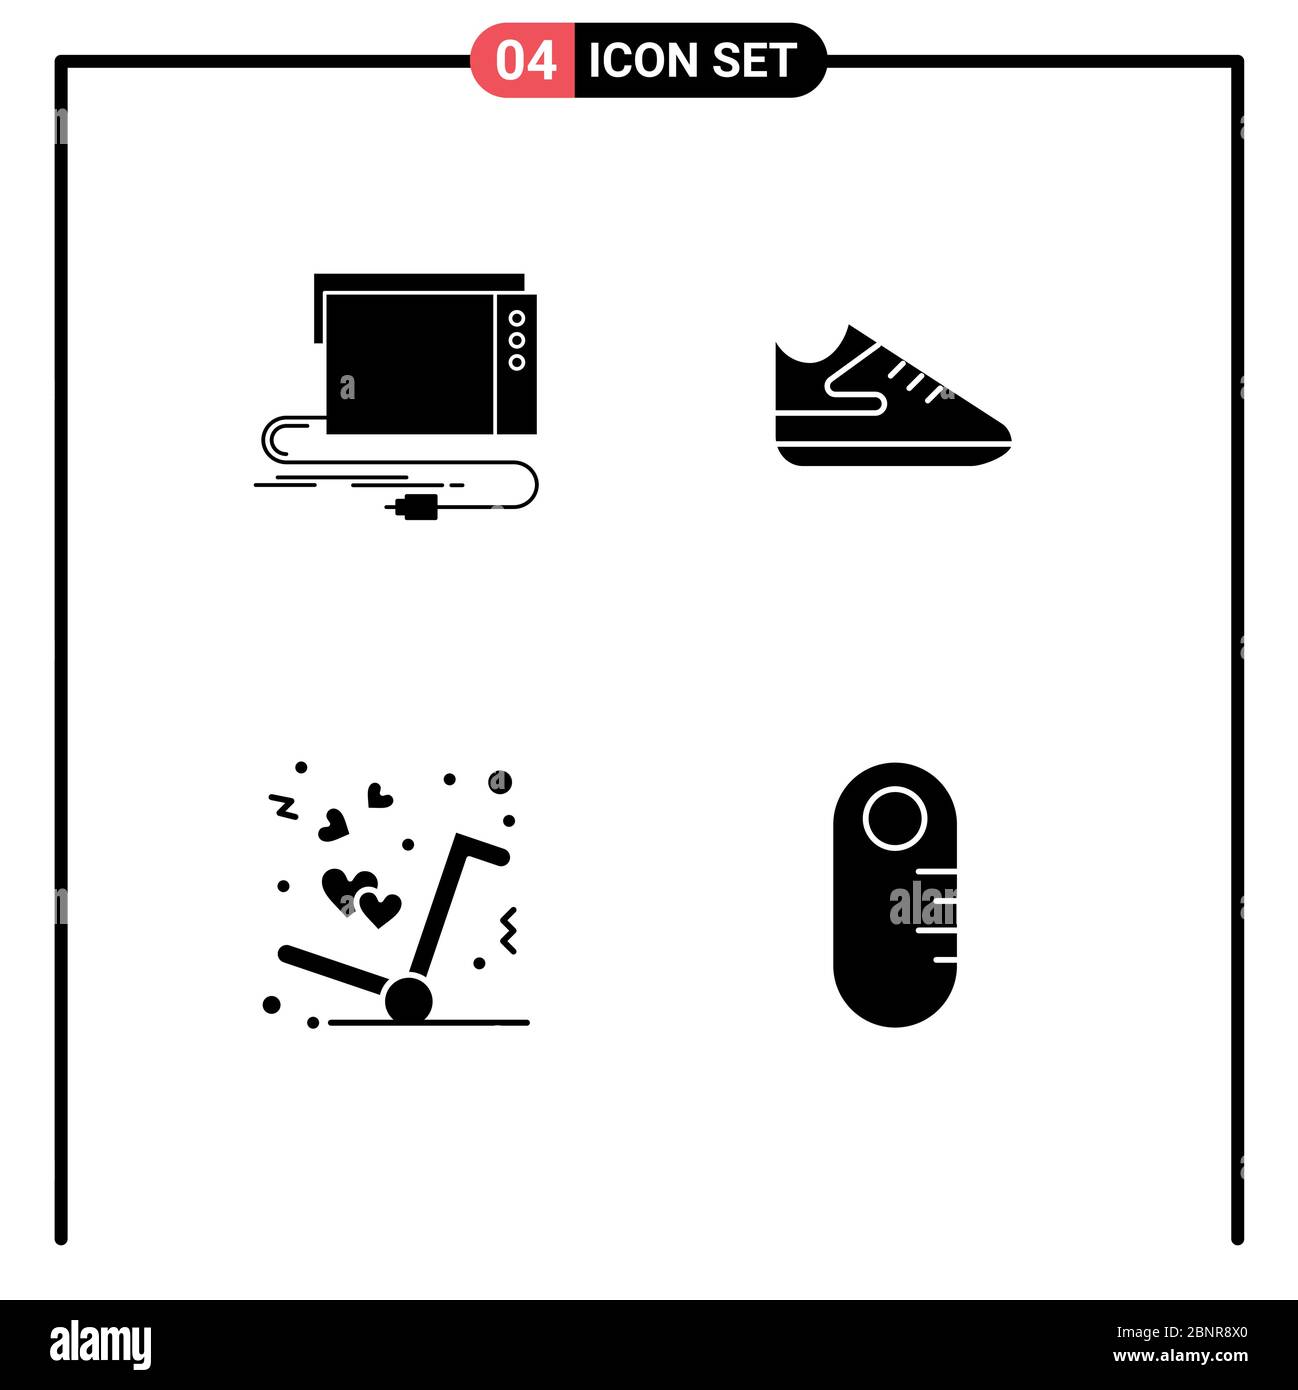 Universal Icon Symbols Group of 4 Modern Solid Glyphs of audio, get, interface, shoes, love Editable Vector Design Elements Stock Vector